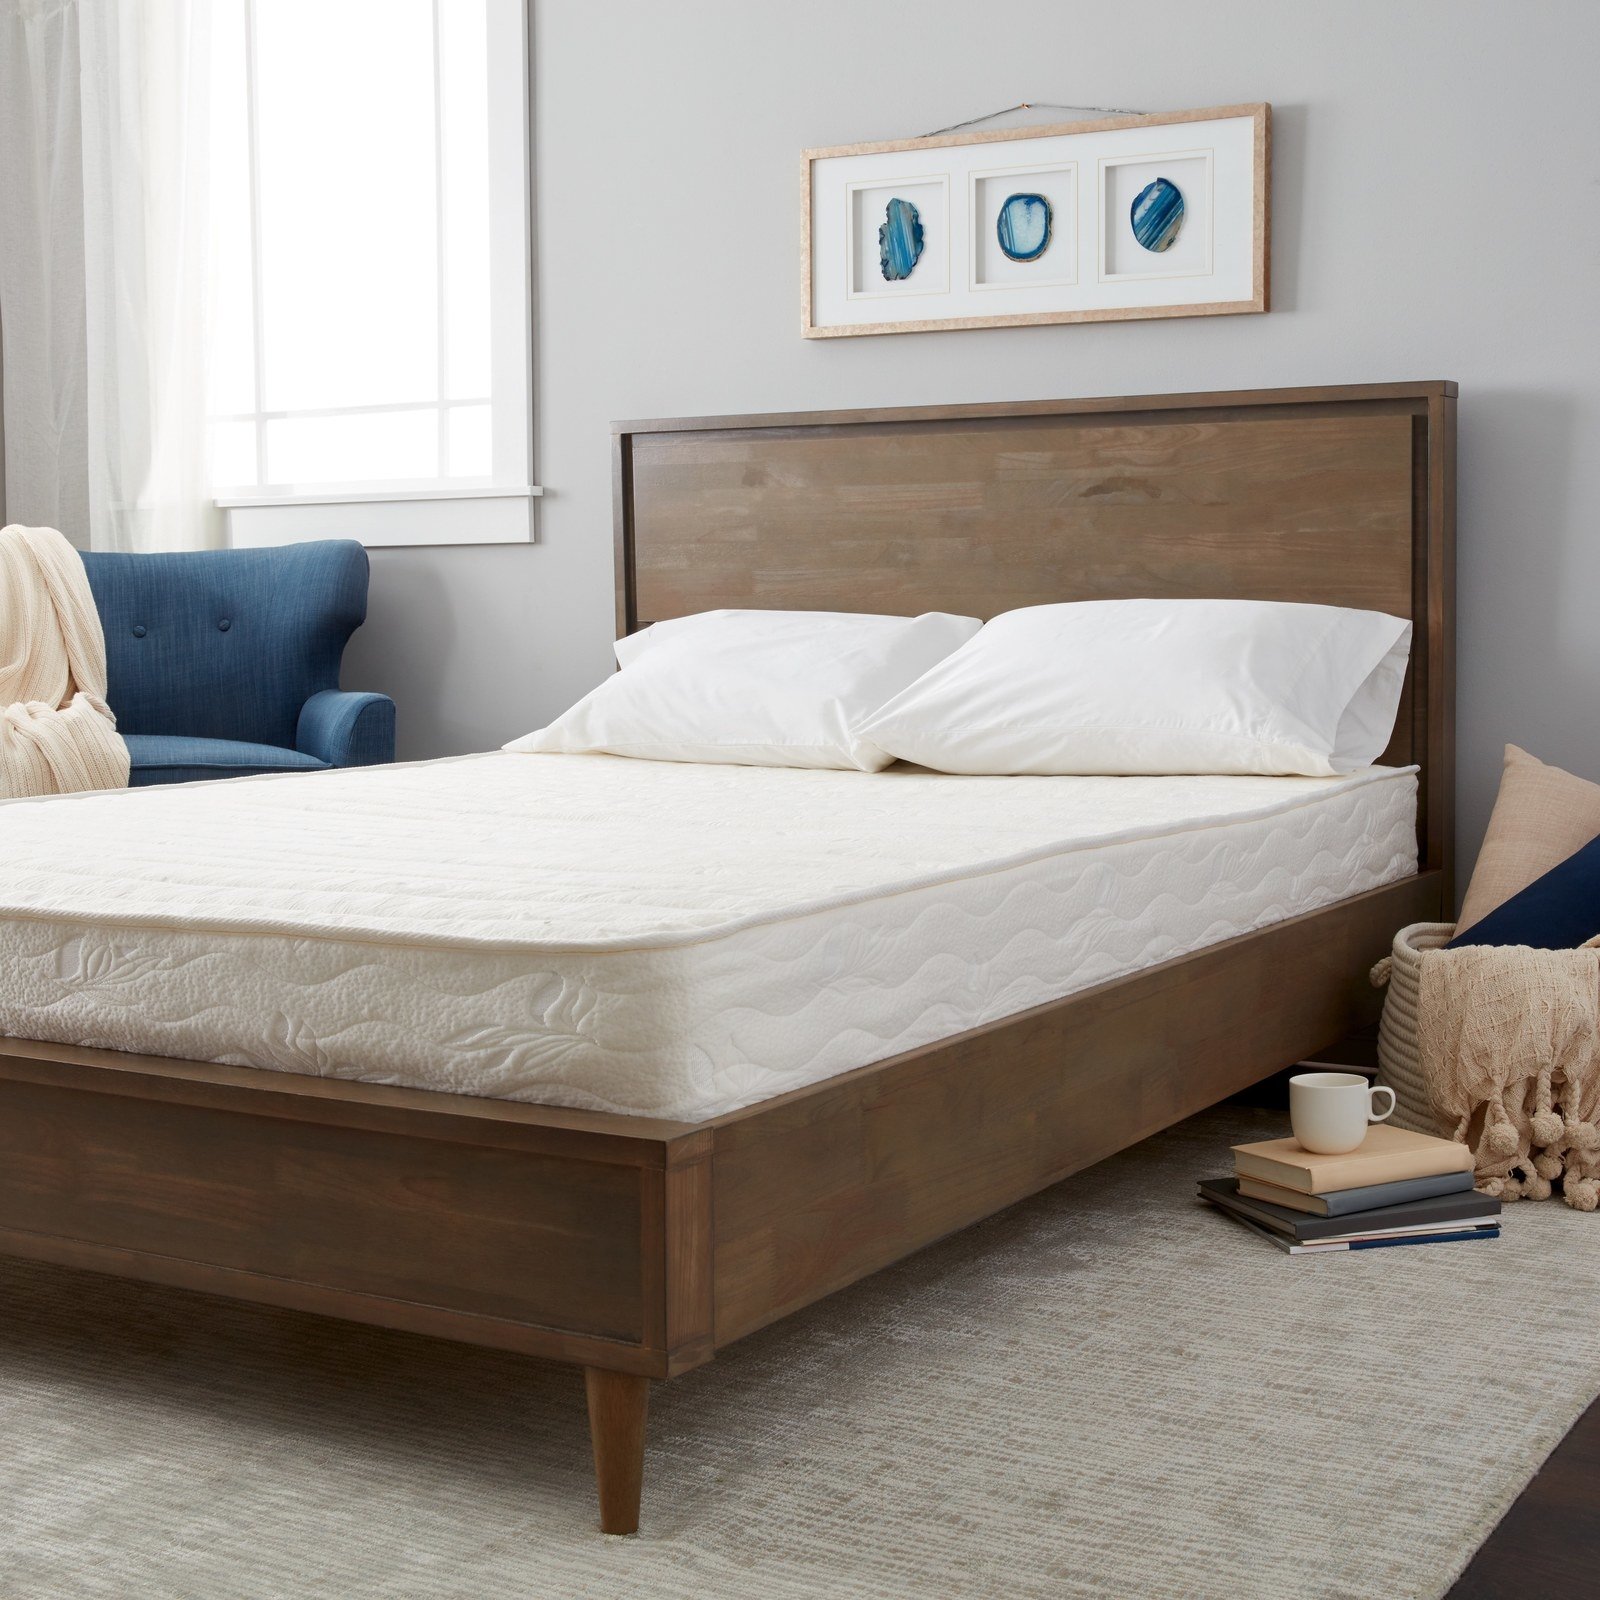 16 Mattresses You Can Get Online That Are As Comfy As They Are Cheap